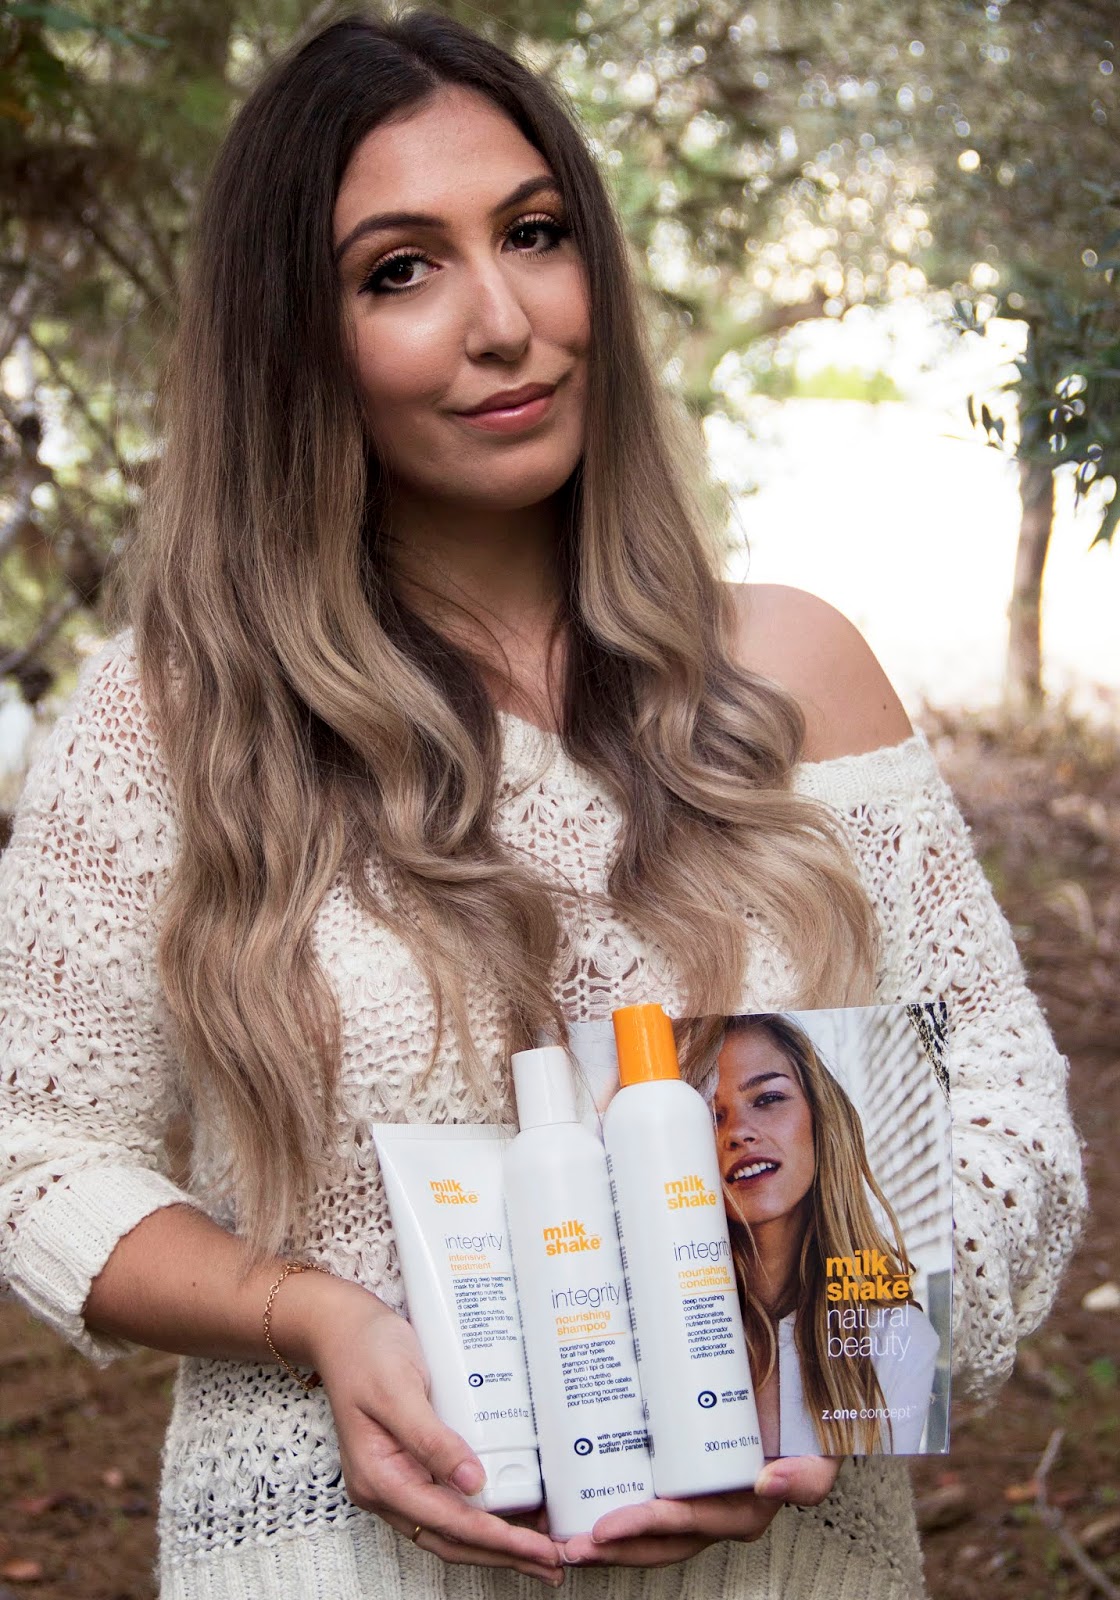 lettelse smal politik My Thoughts on Milk Shake's Integrity Range | A Blonde on the Go